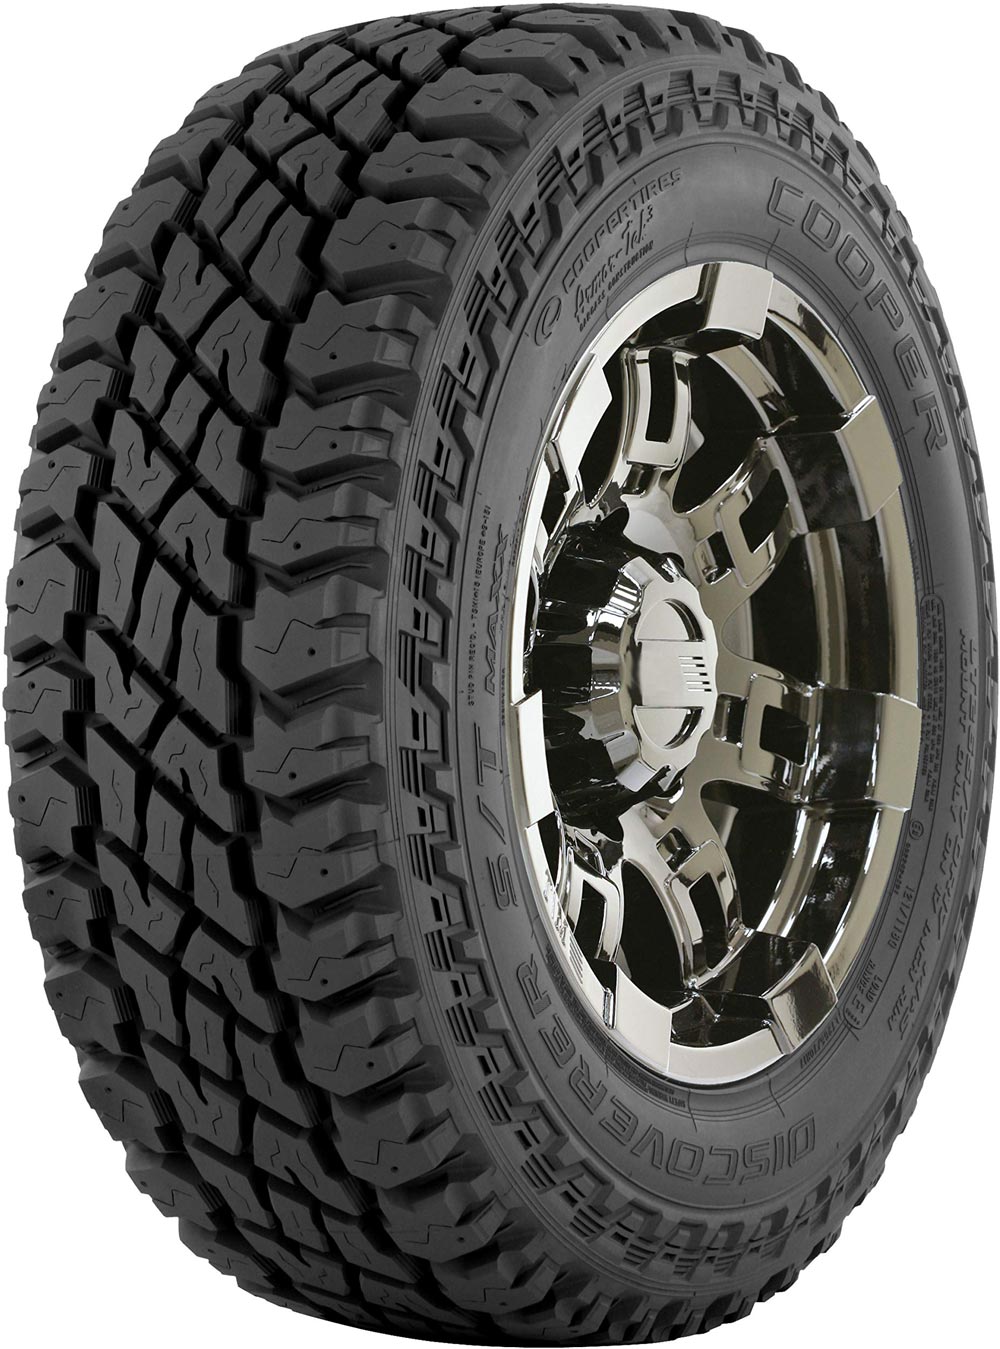 COOPER DISCOVERER ST MAXX P O BSW 245/70 R16 118Q